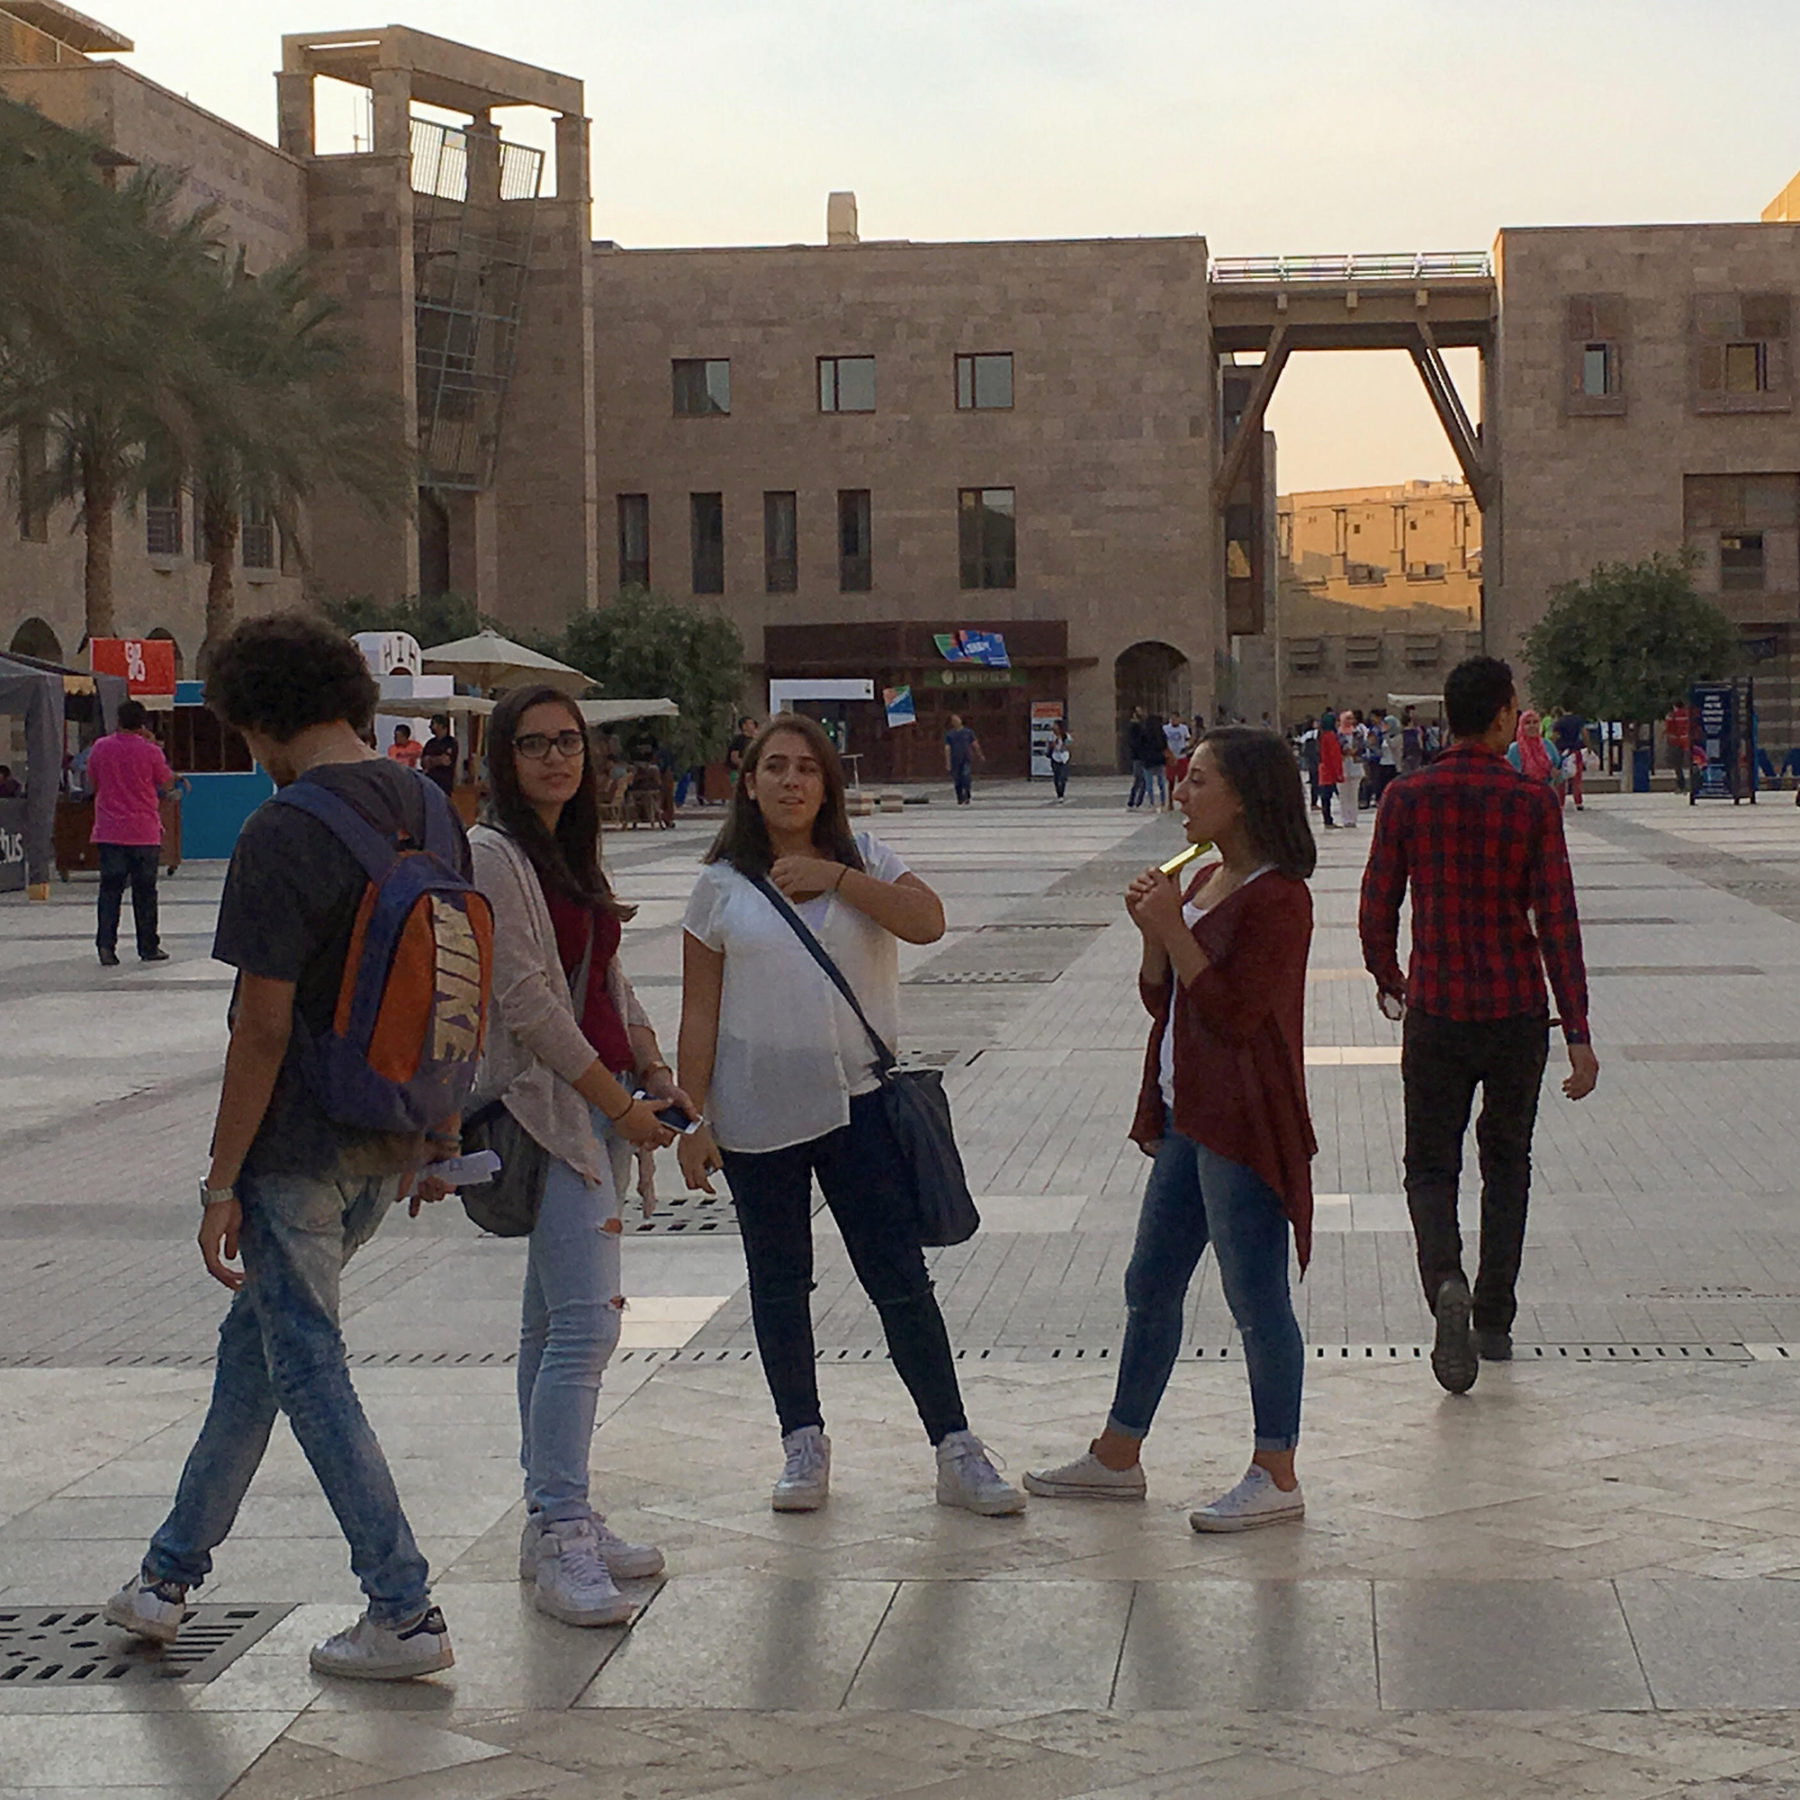 photo of students in a town square